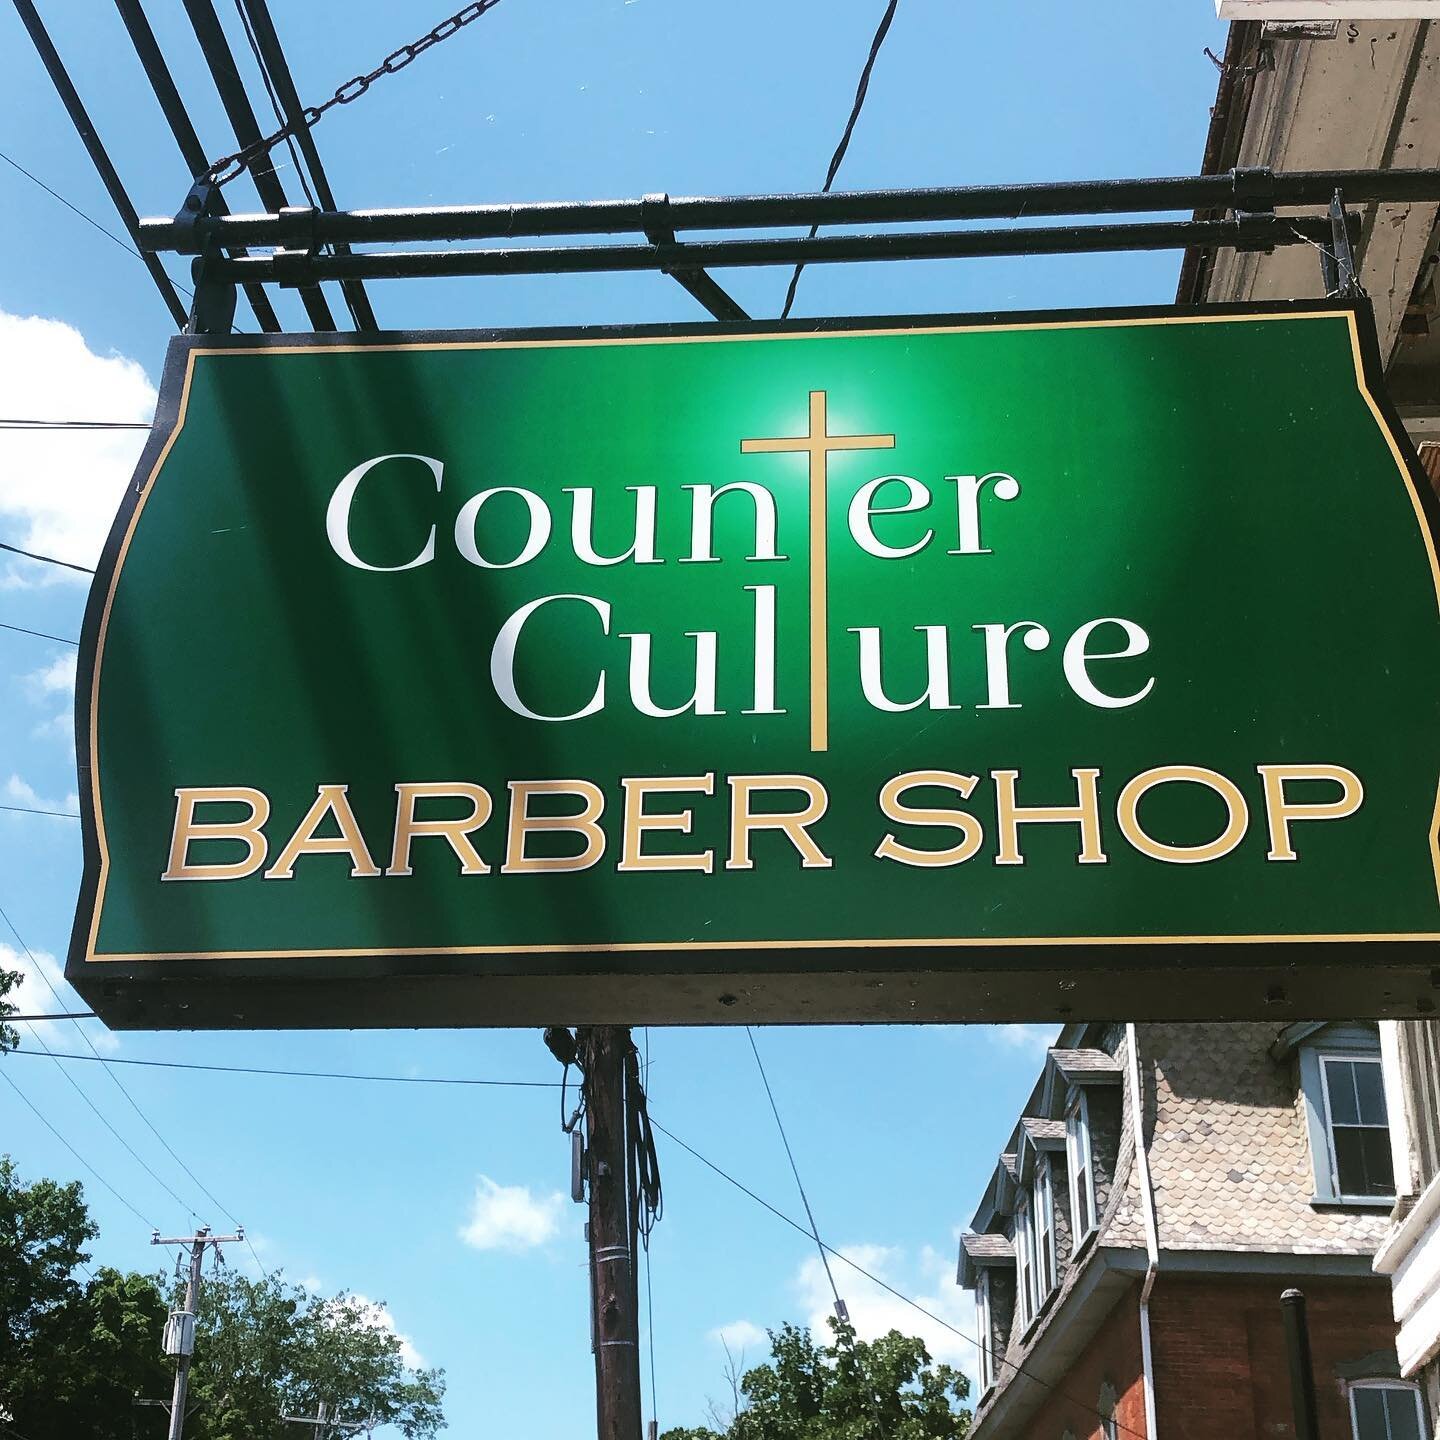 Counter culture barbershop is looking for a licensed barber to take on a full time position. Dm or call the shop if interested. We&rsquo;re looking forward to hearing from you!!!